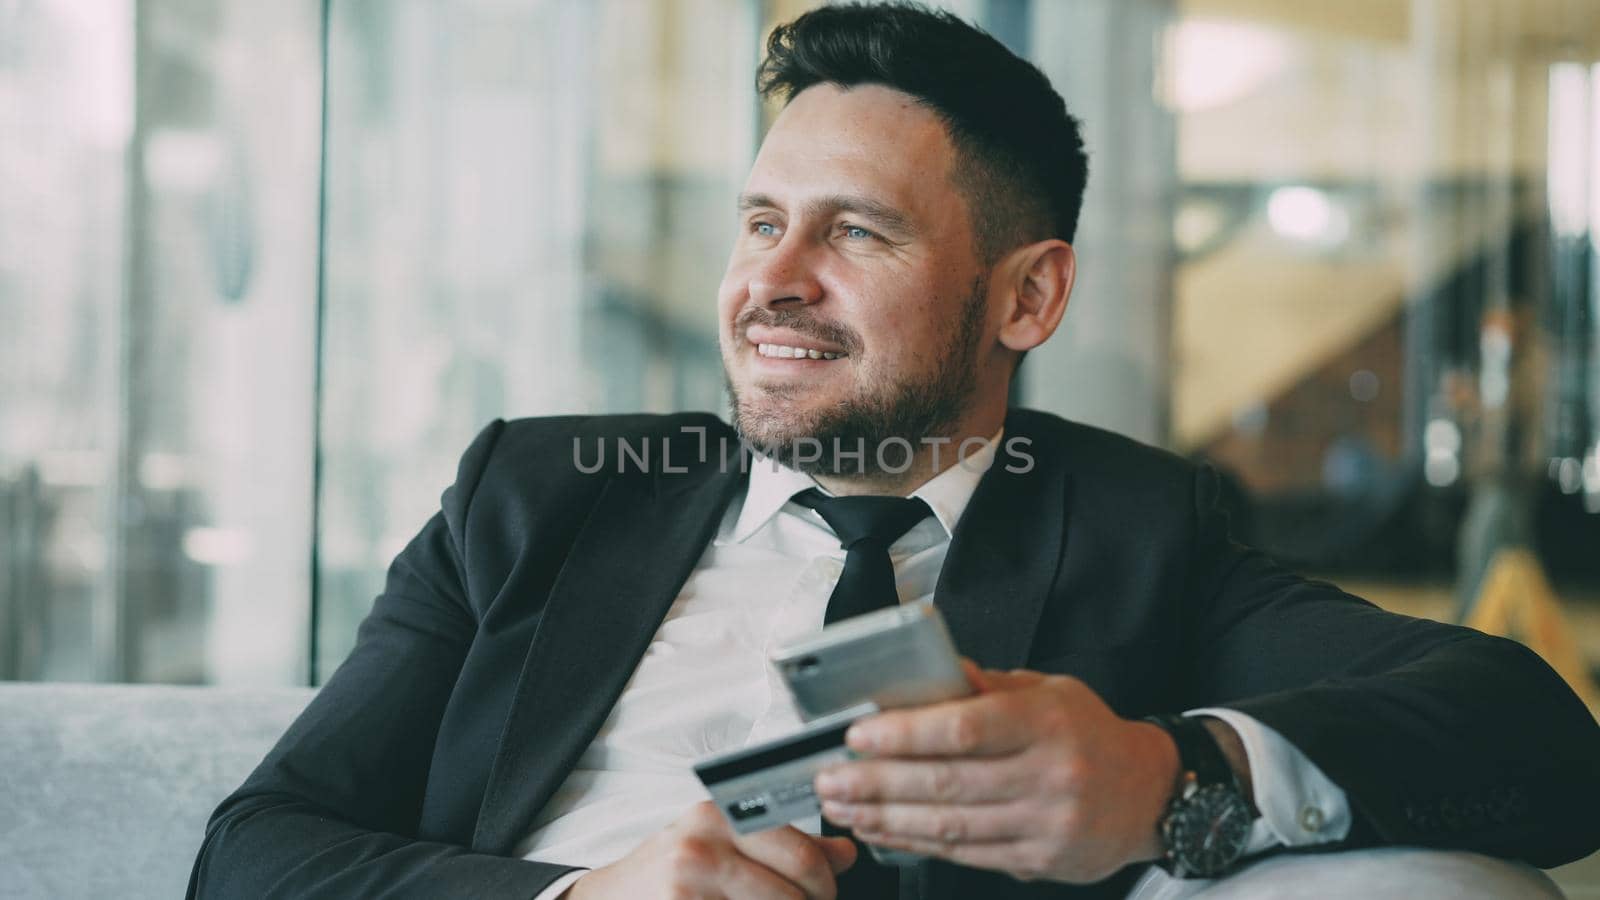 Cheerful Caucasian businessman in suit using online banking holding credit card and smartphone in his hands in modern cafe indoors during lunch break